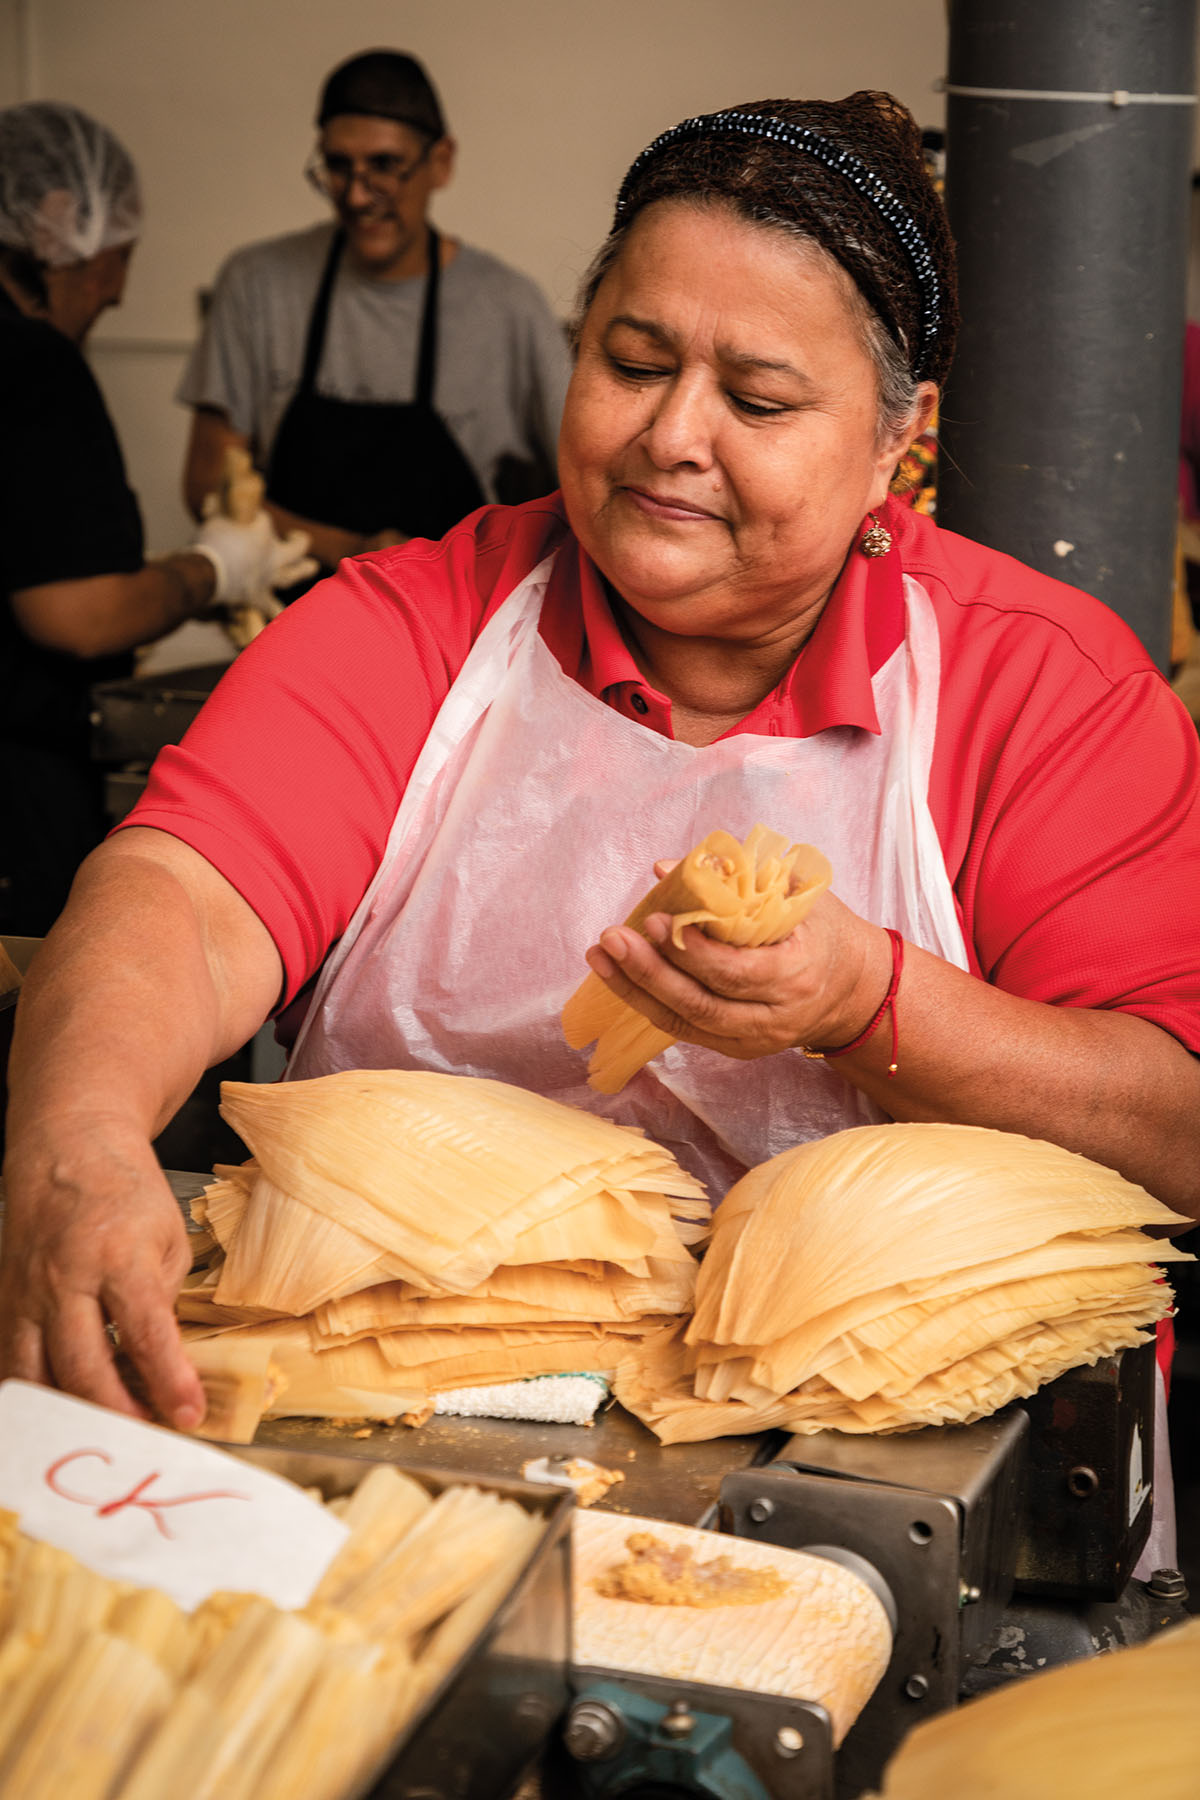 A woman wearing an apron and red shirt holds corn husks used in making tamales